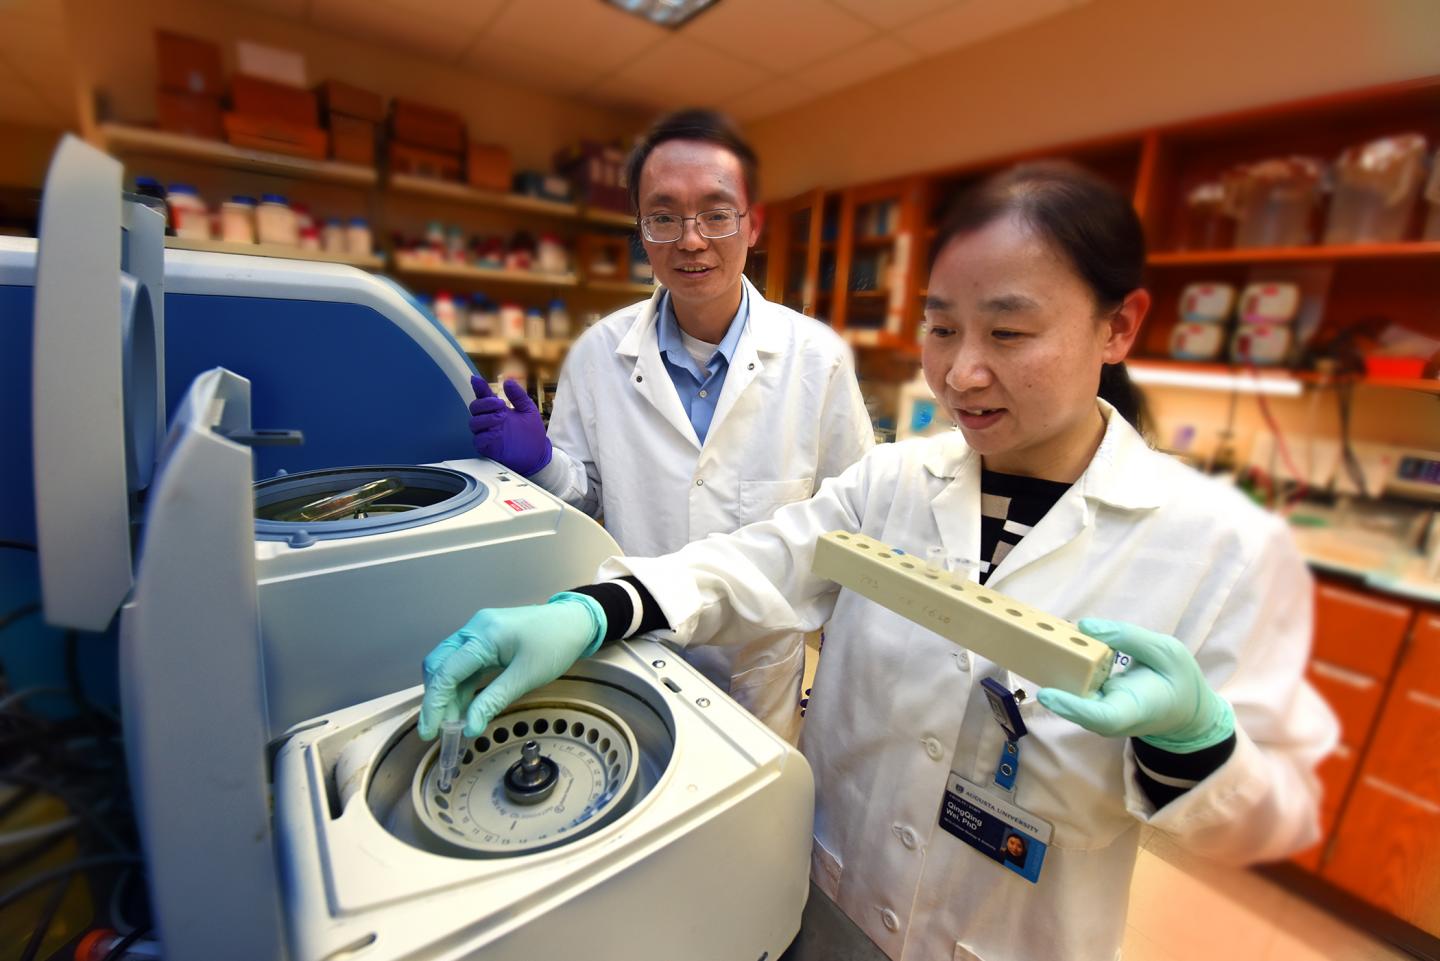 Zheng Dong and Qingqing Wei, Medical College of Georgia at Augusta University